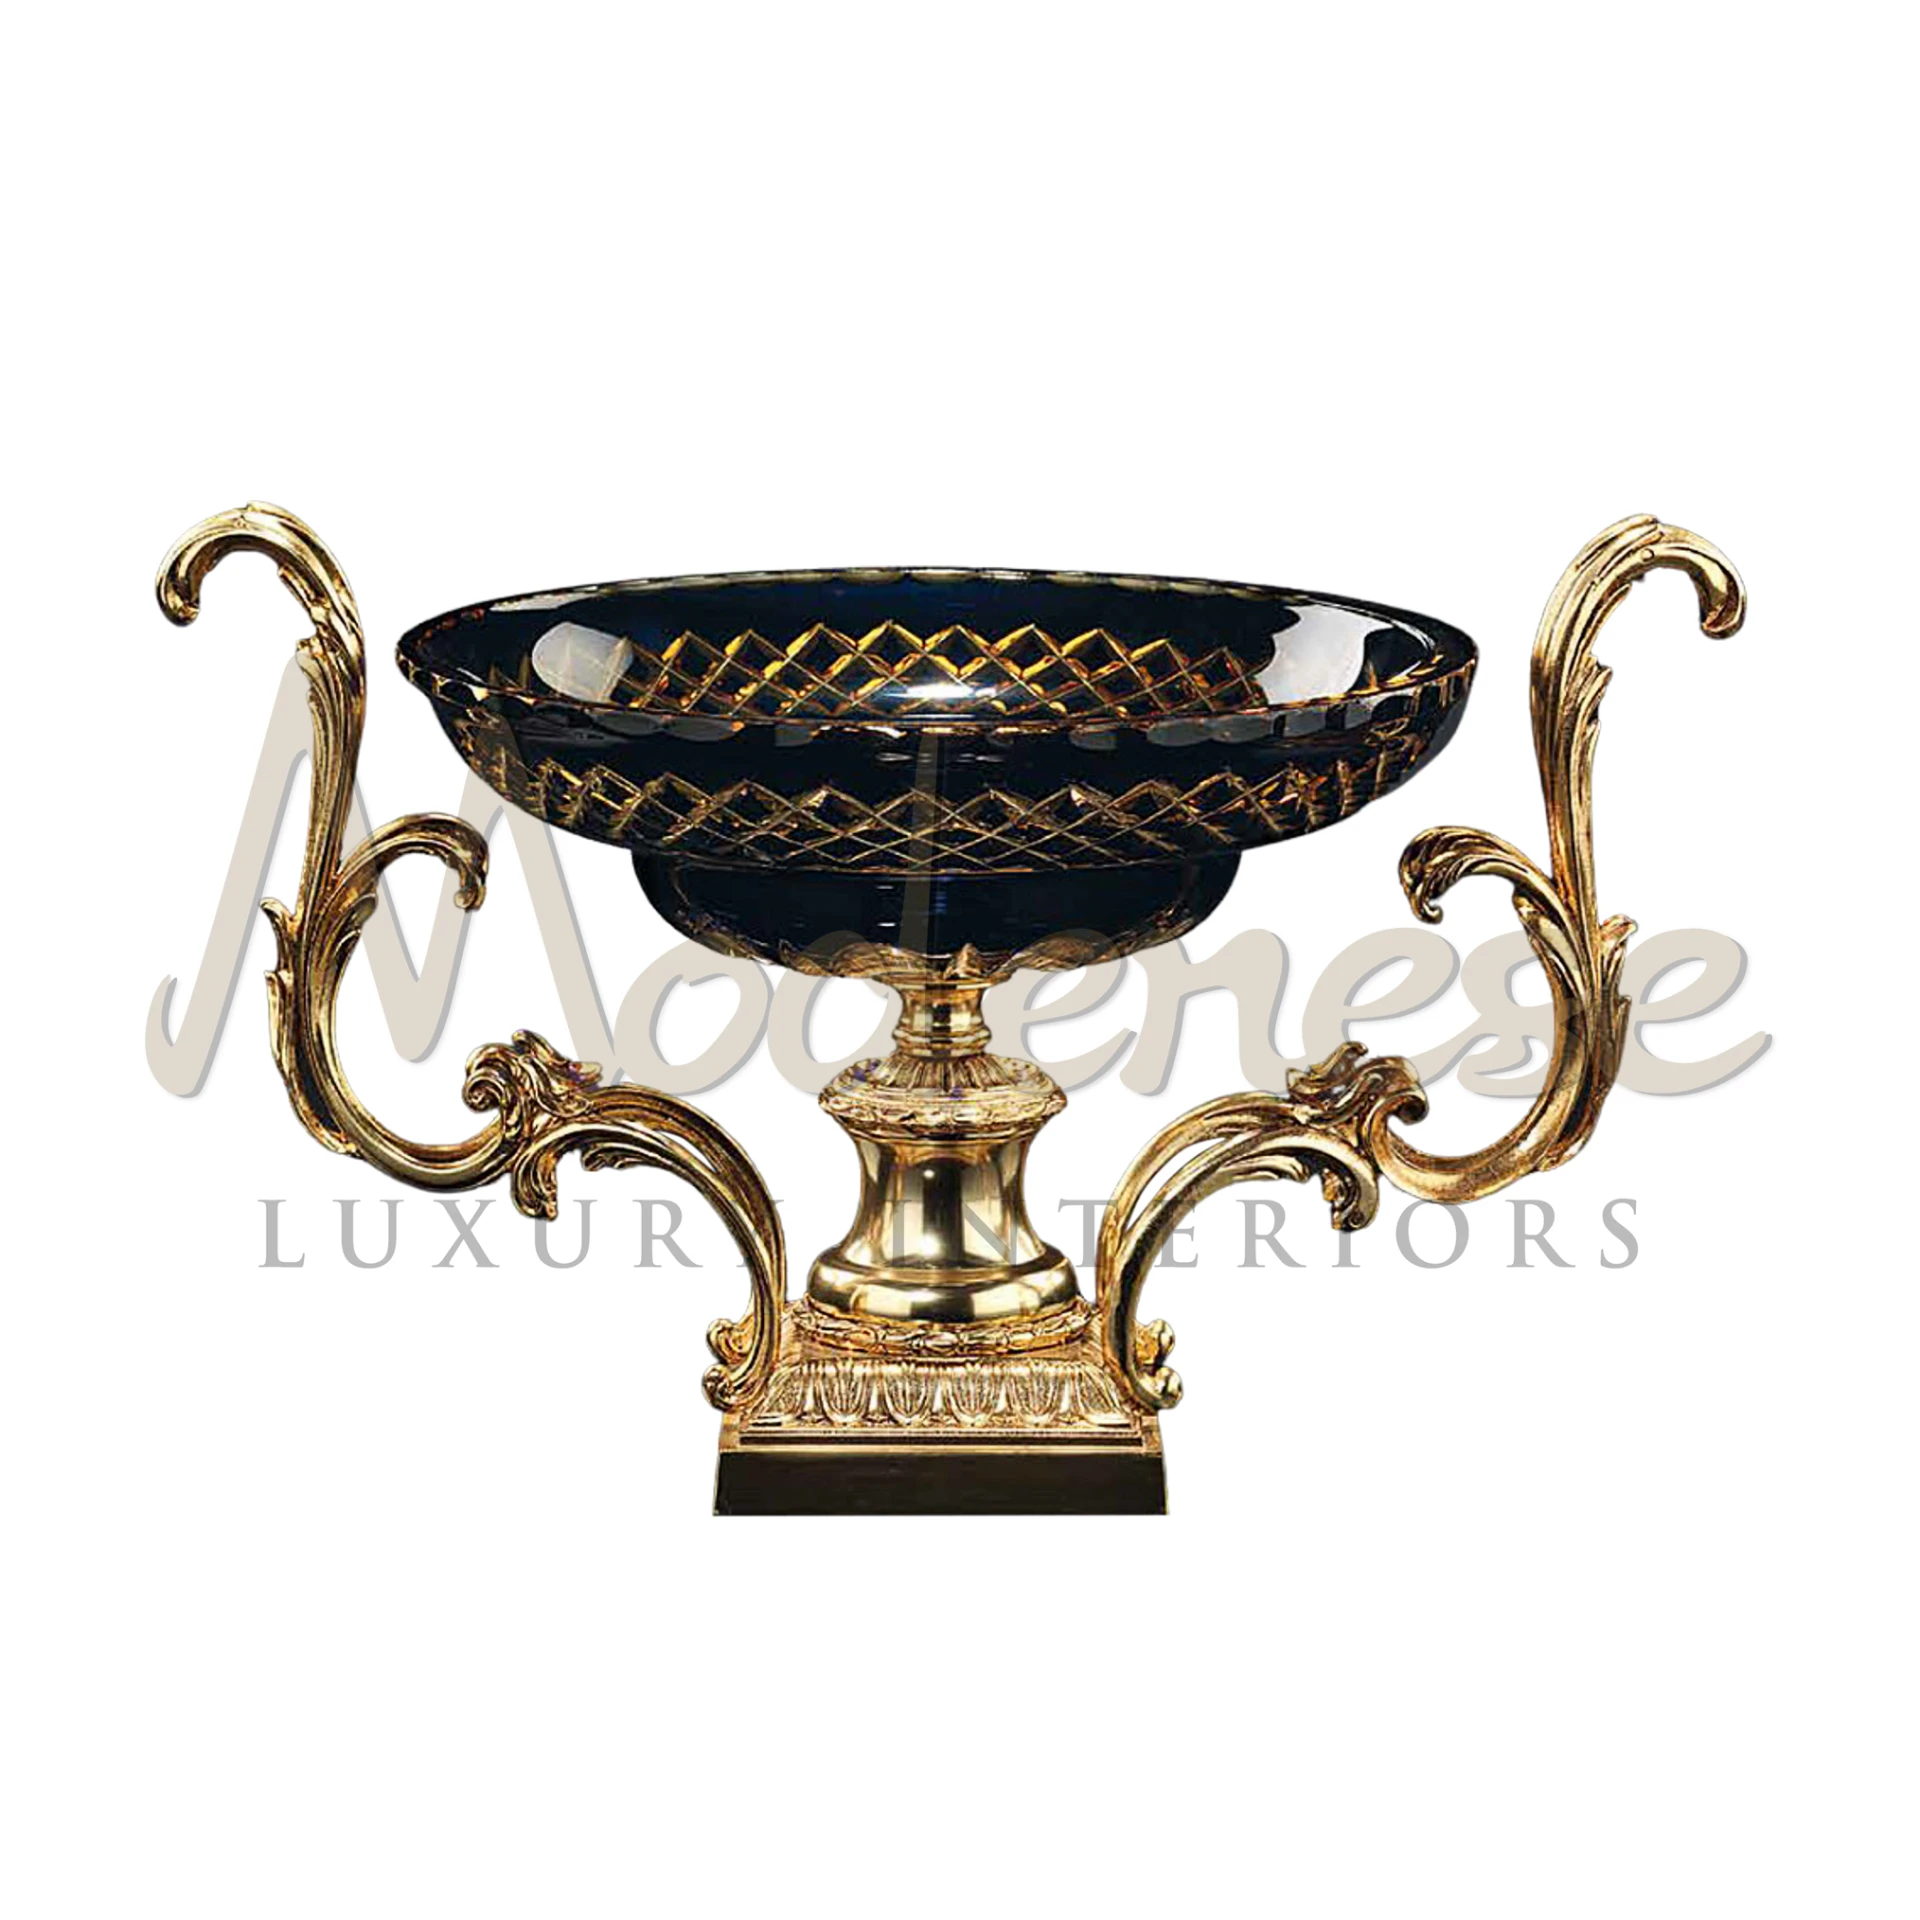 Traditional Figured Glass Bowl by Modenese, with ornate patterns and a light-reflecting finish, embodying classic luxury.